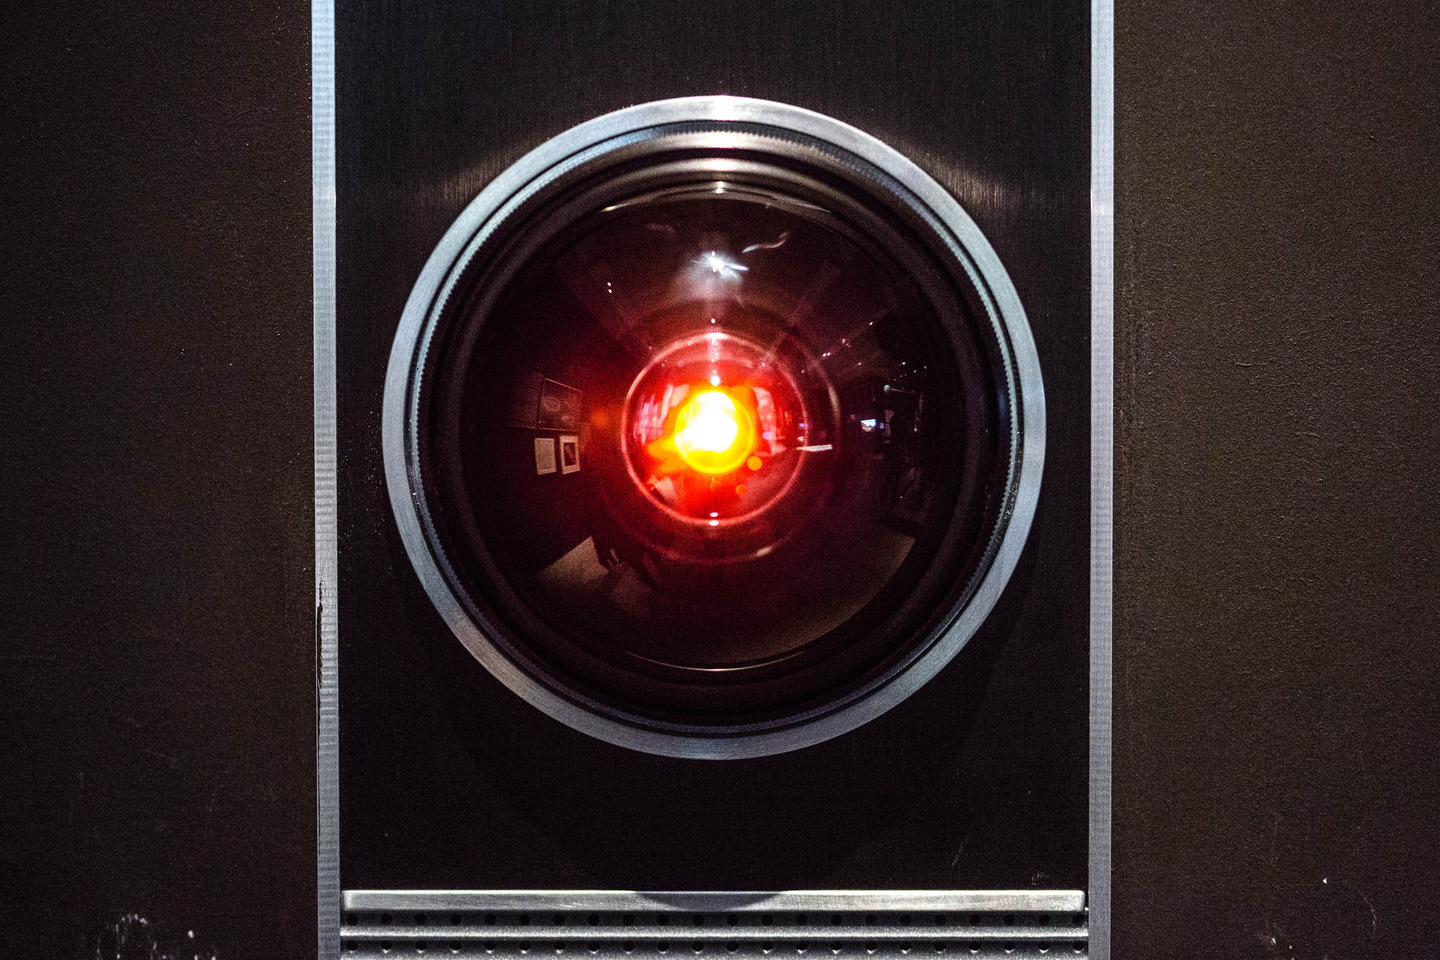 Hal 9000 in 2001 is what a lot of people equate with needing a big red button.